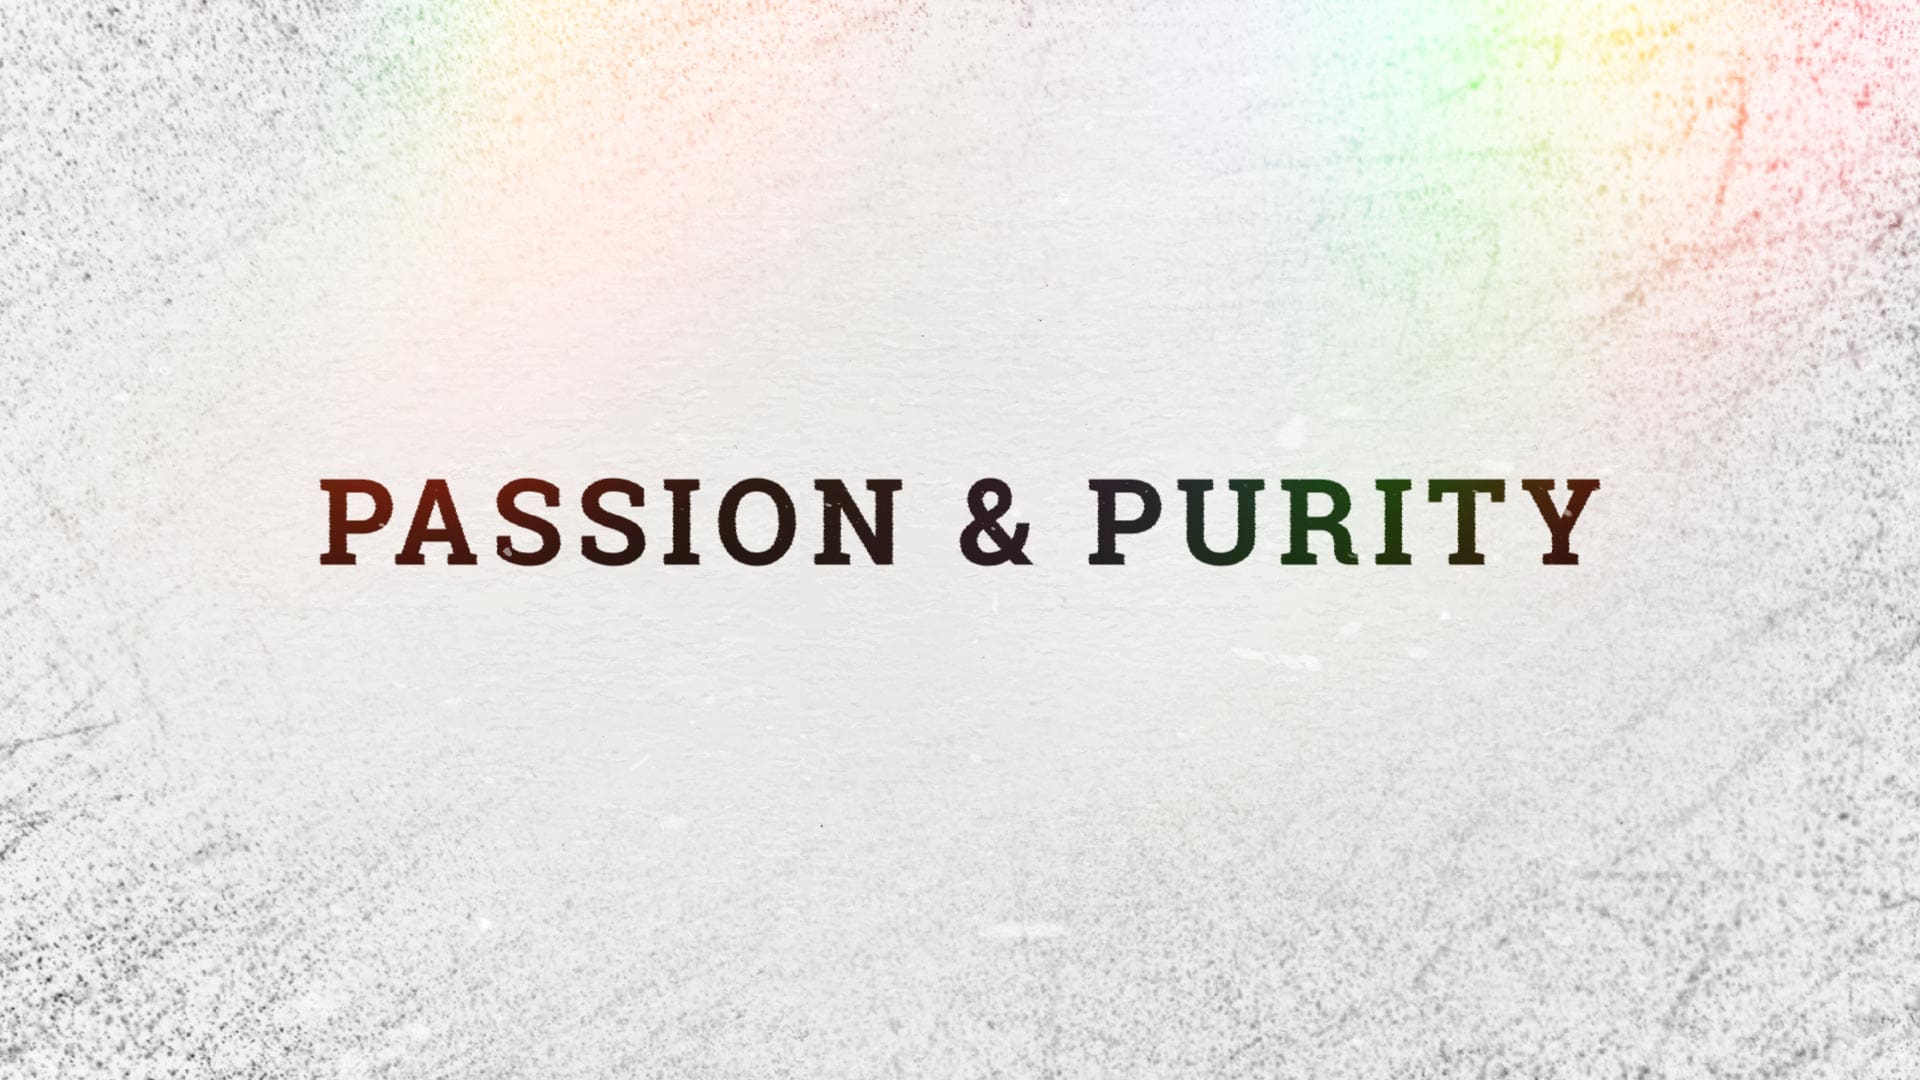 Passion & Purity Image